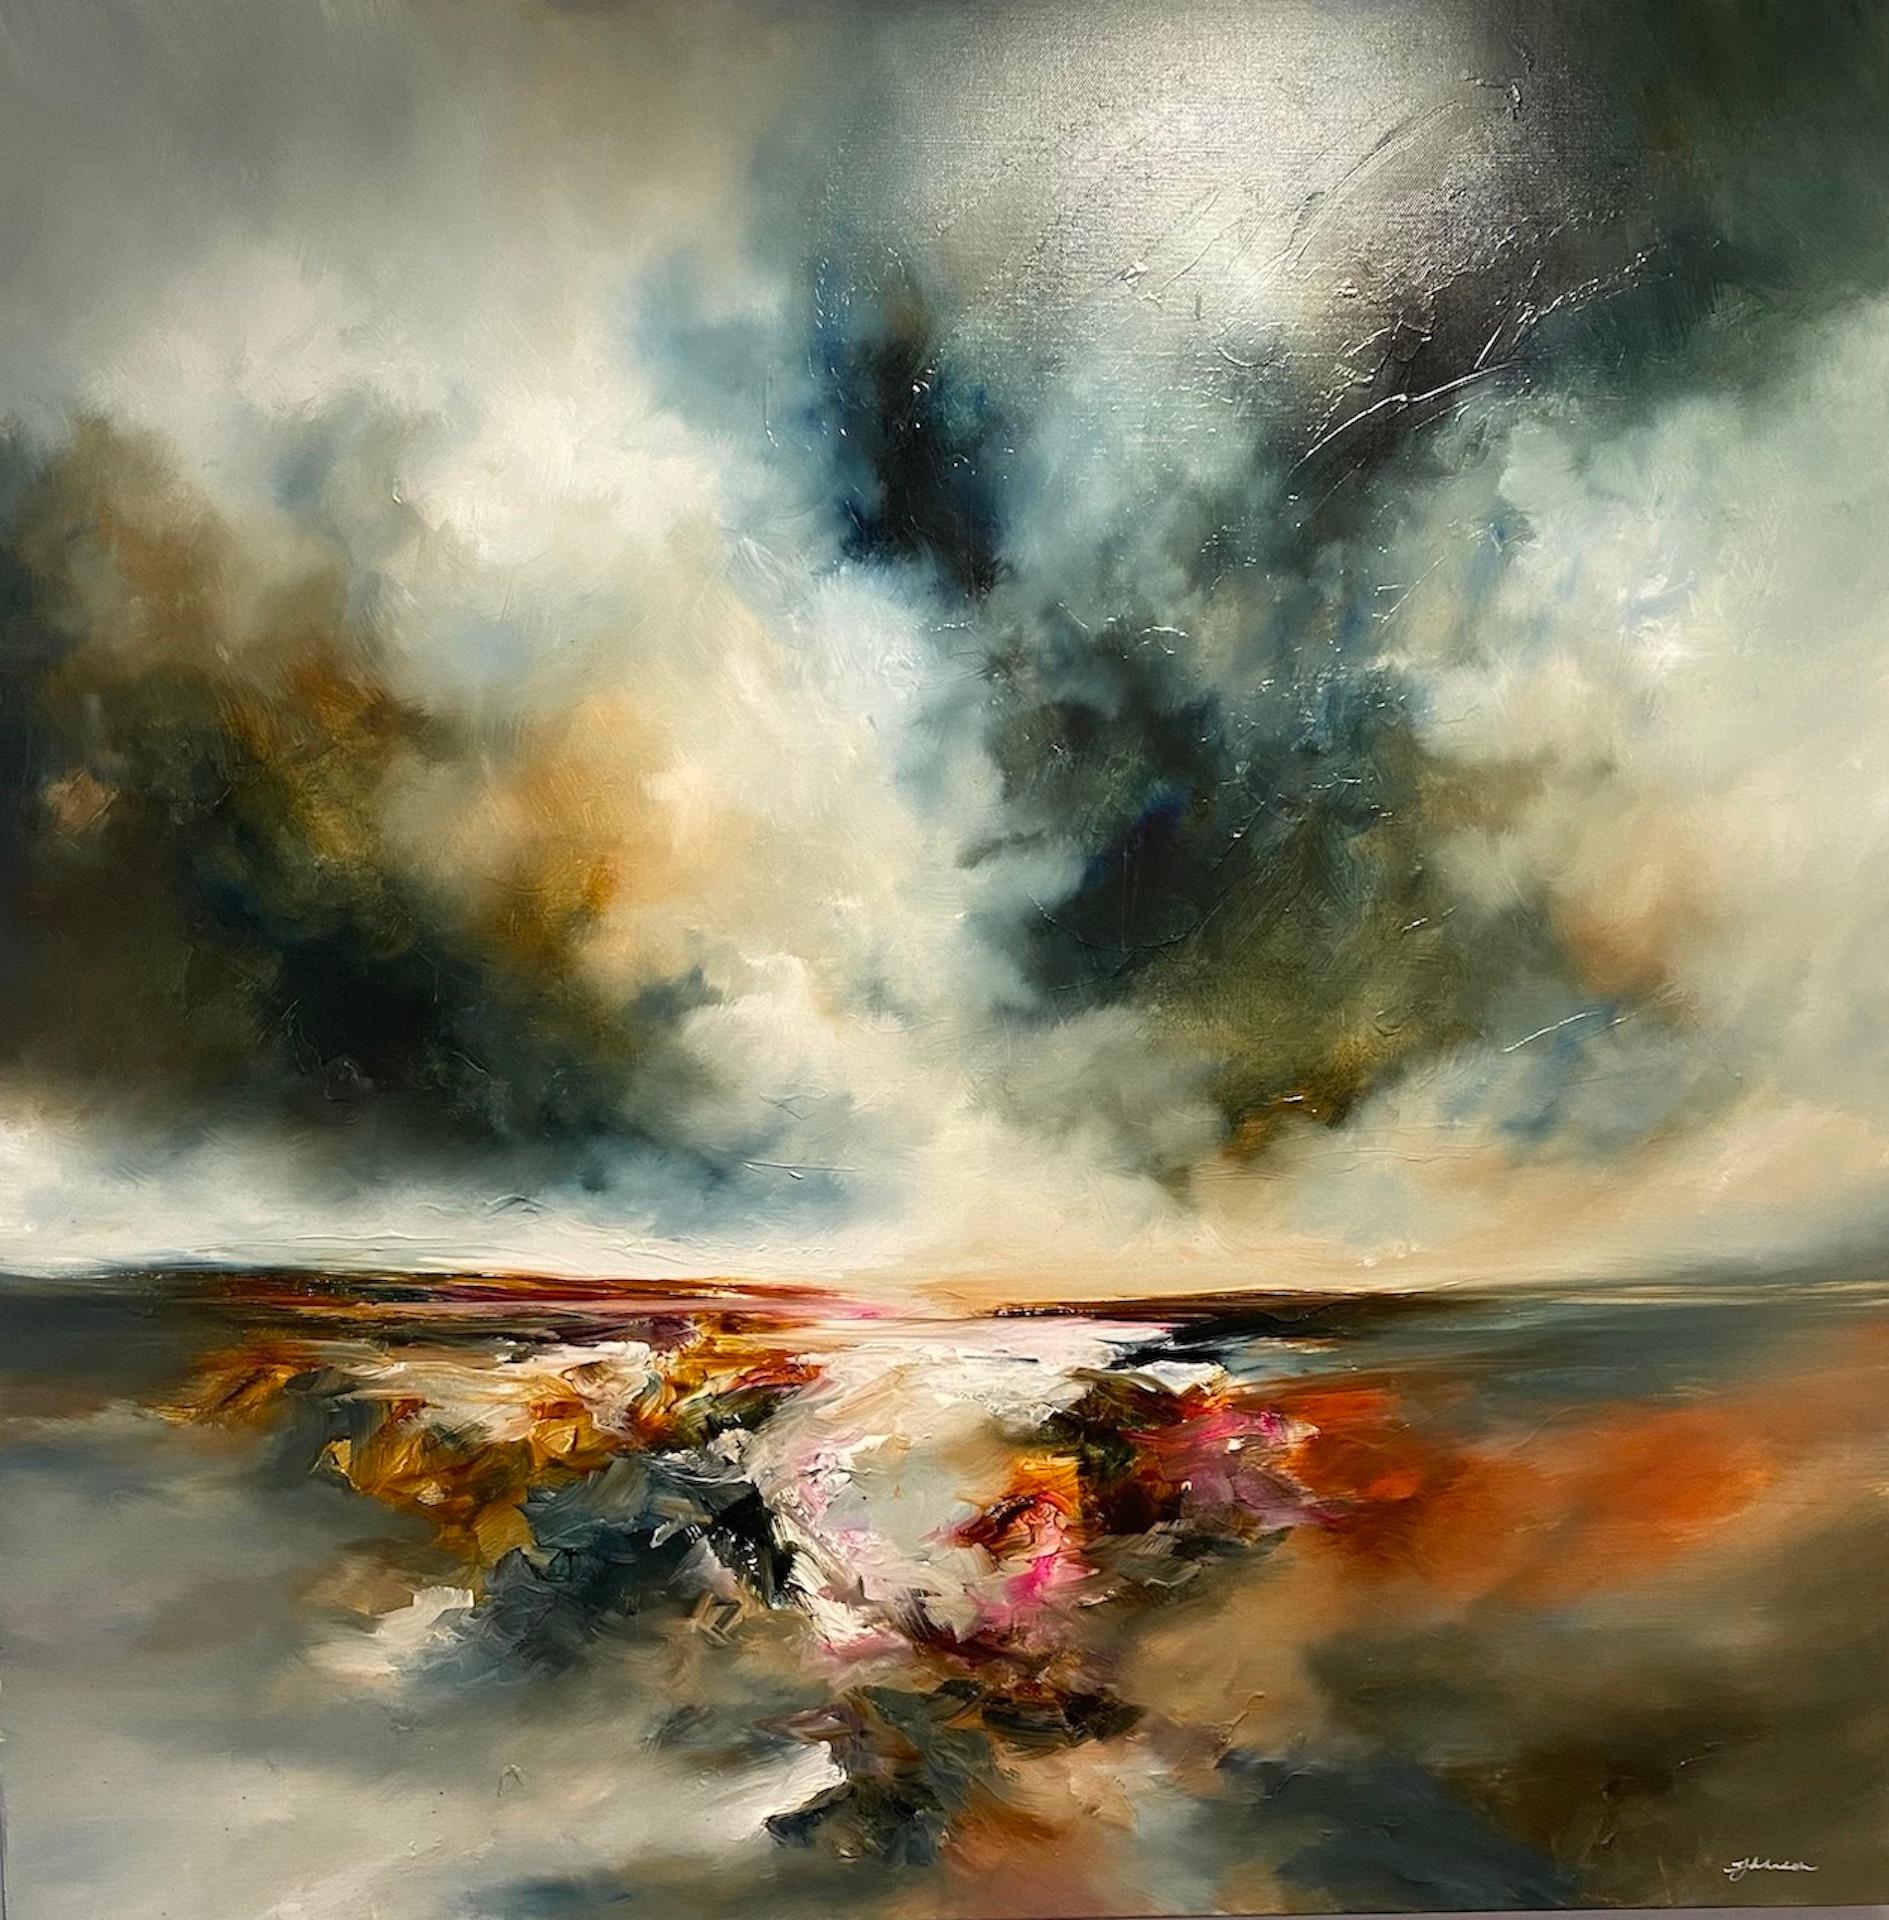 Dramatic Seascape [2020]
Original
Seascapes
Oil Paint on Canvas
Image size: H:91 cm x W:91 cm
Complete Size of Unframed Work: H:91 cm x W:91 cm x D:4cm
Sold Unframed
Please note that insitu images are purely an indication of how a piece may